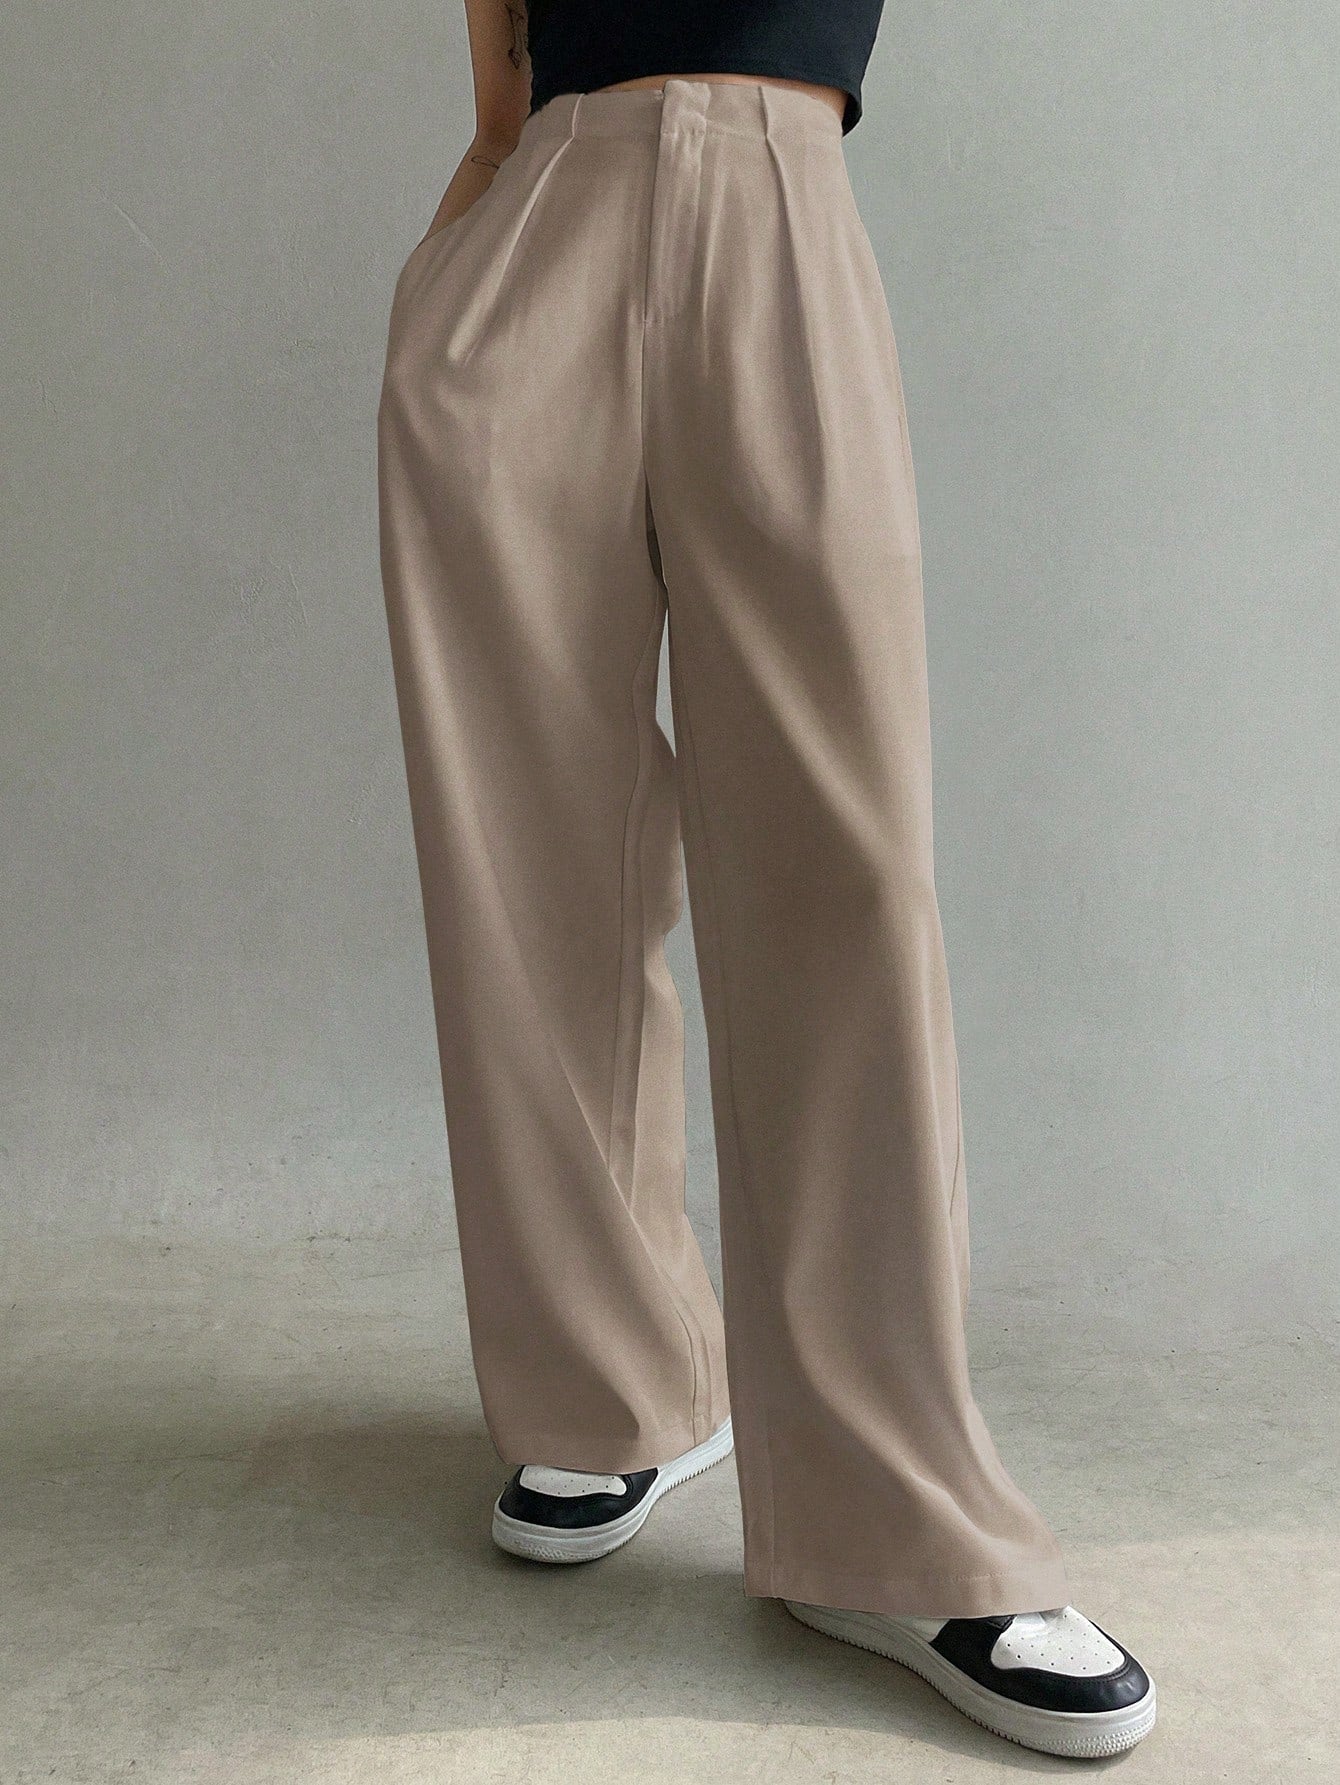 Women's Solid Color Pleated High Waist Loose Casual Suit Pants